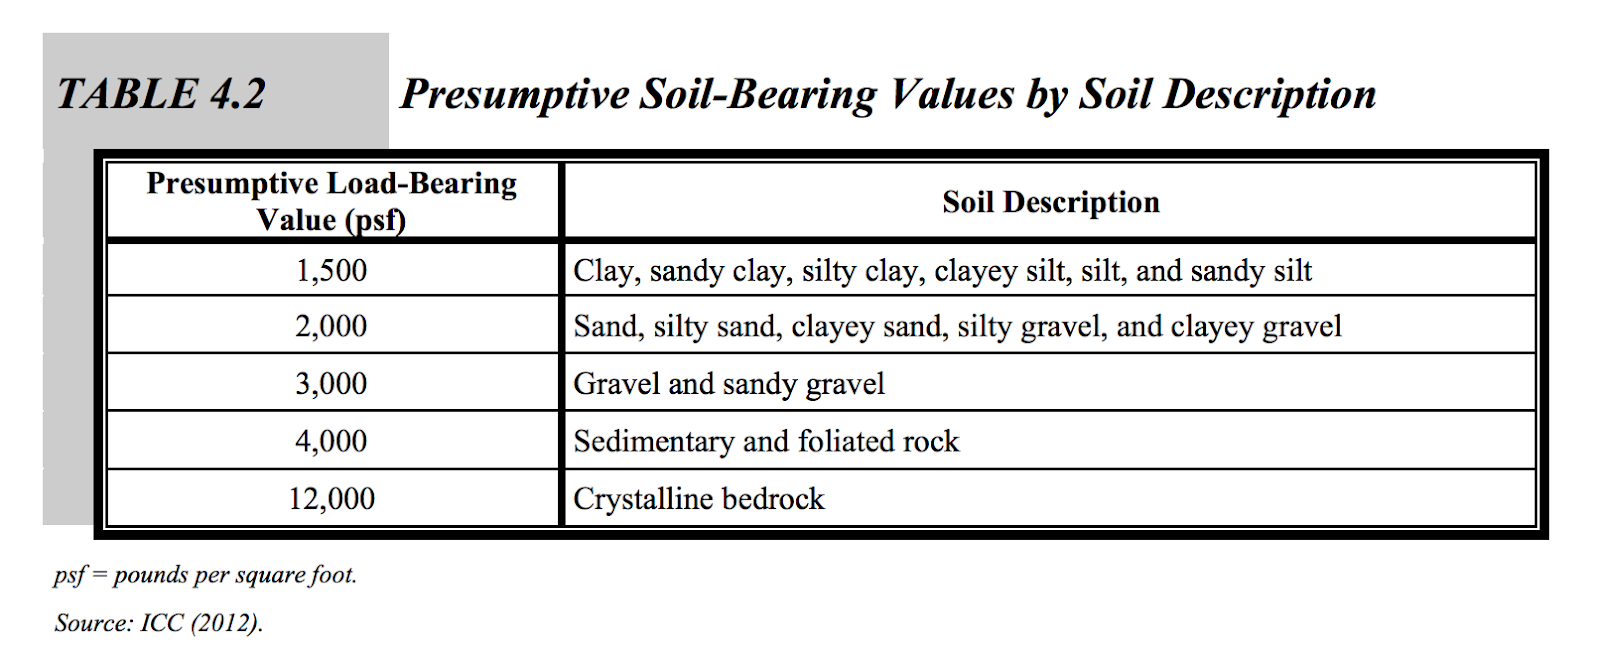 Soil types and load-bearing value (psf)